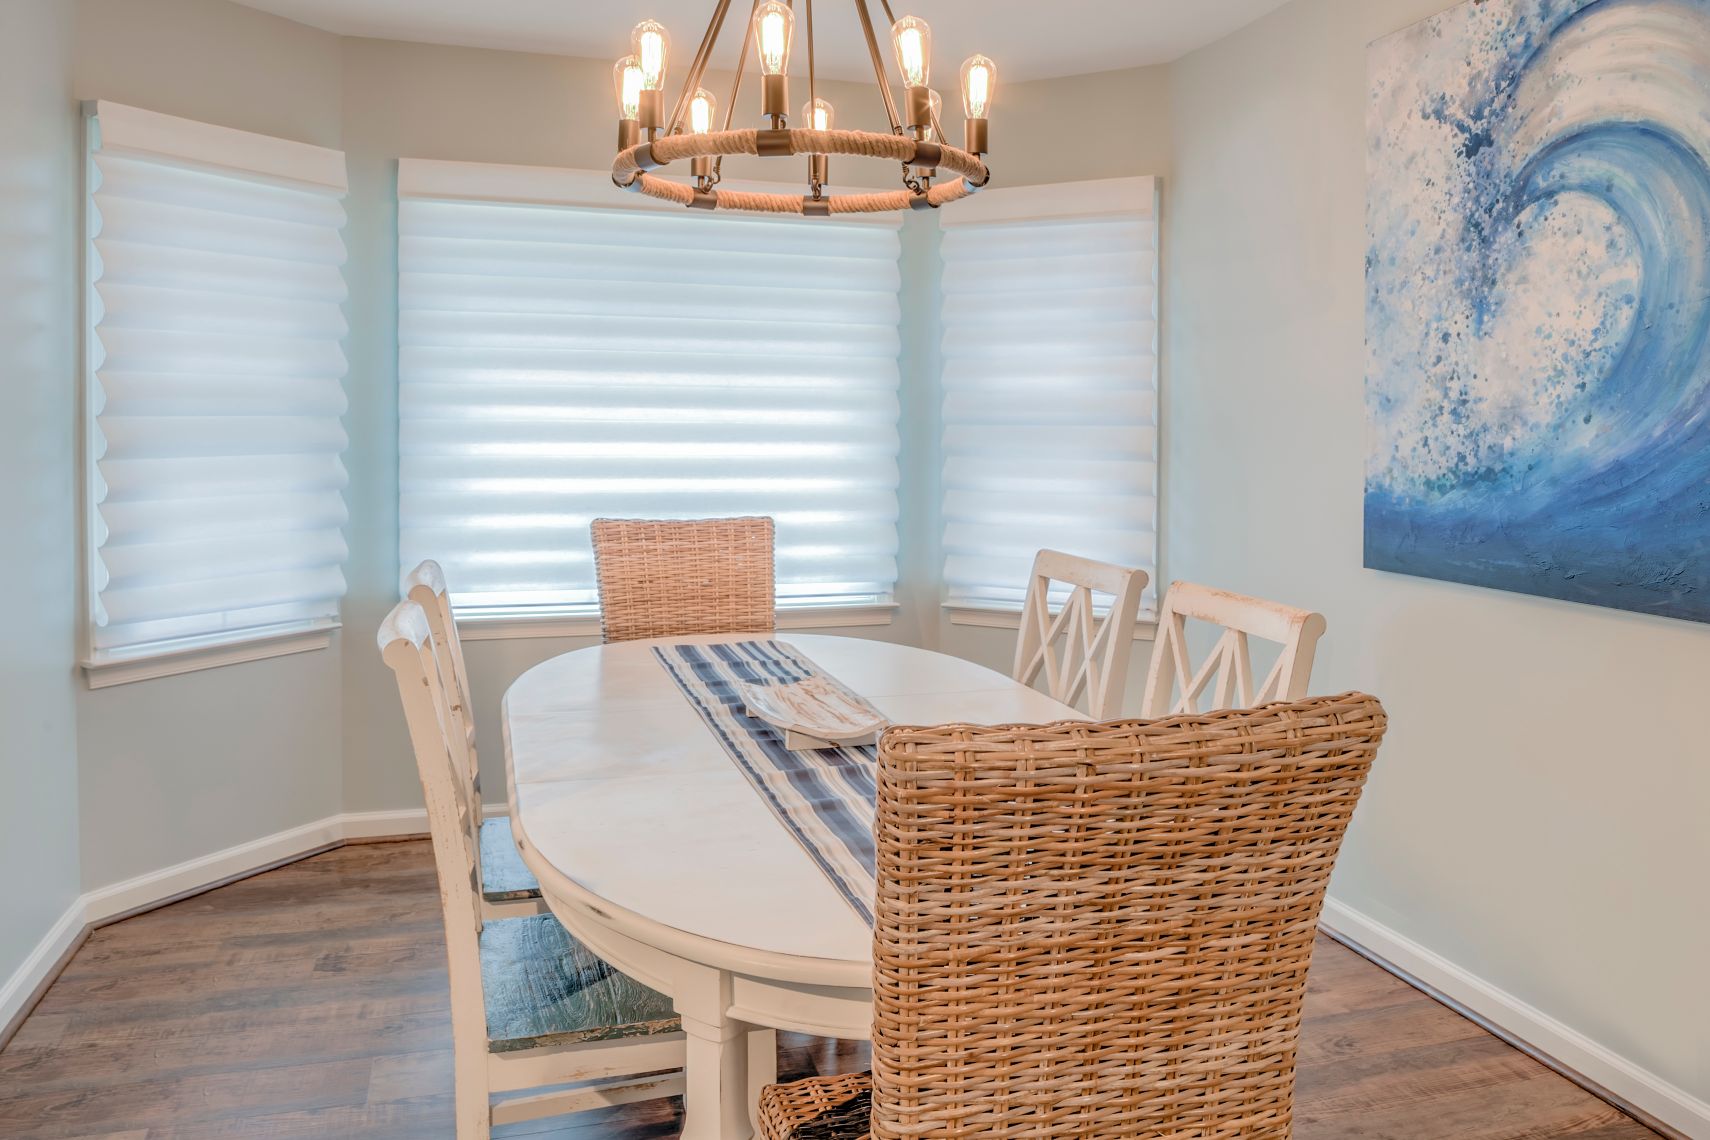 Kitchen Remodel in Velta Drive, Ocean View DE with Oval Dining Table and Six Chairs